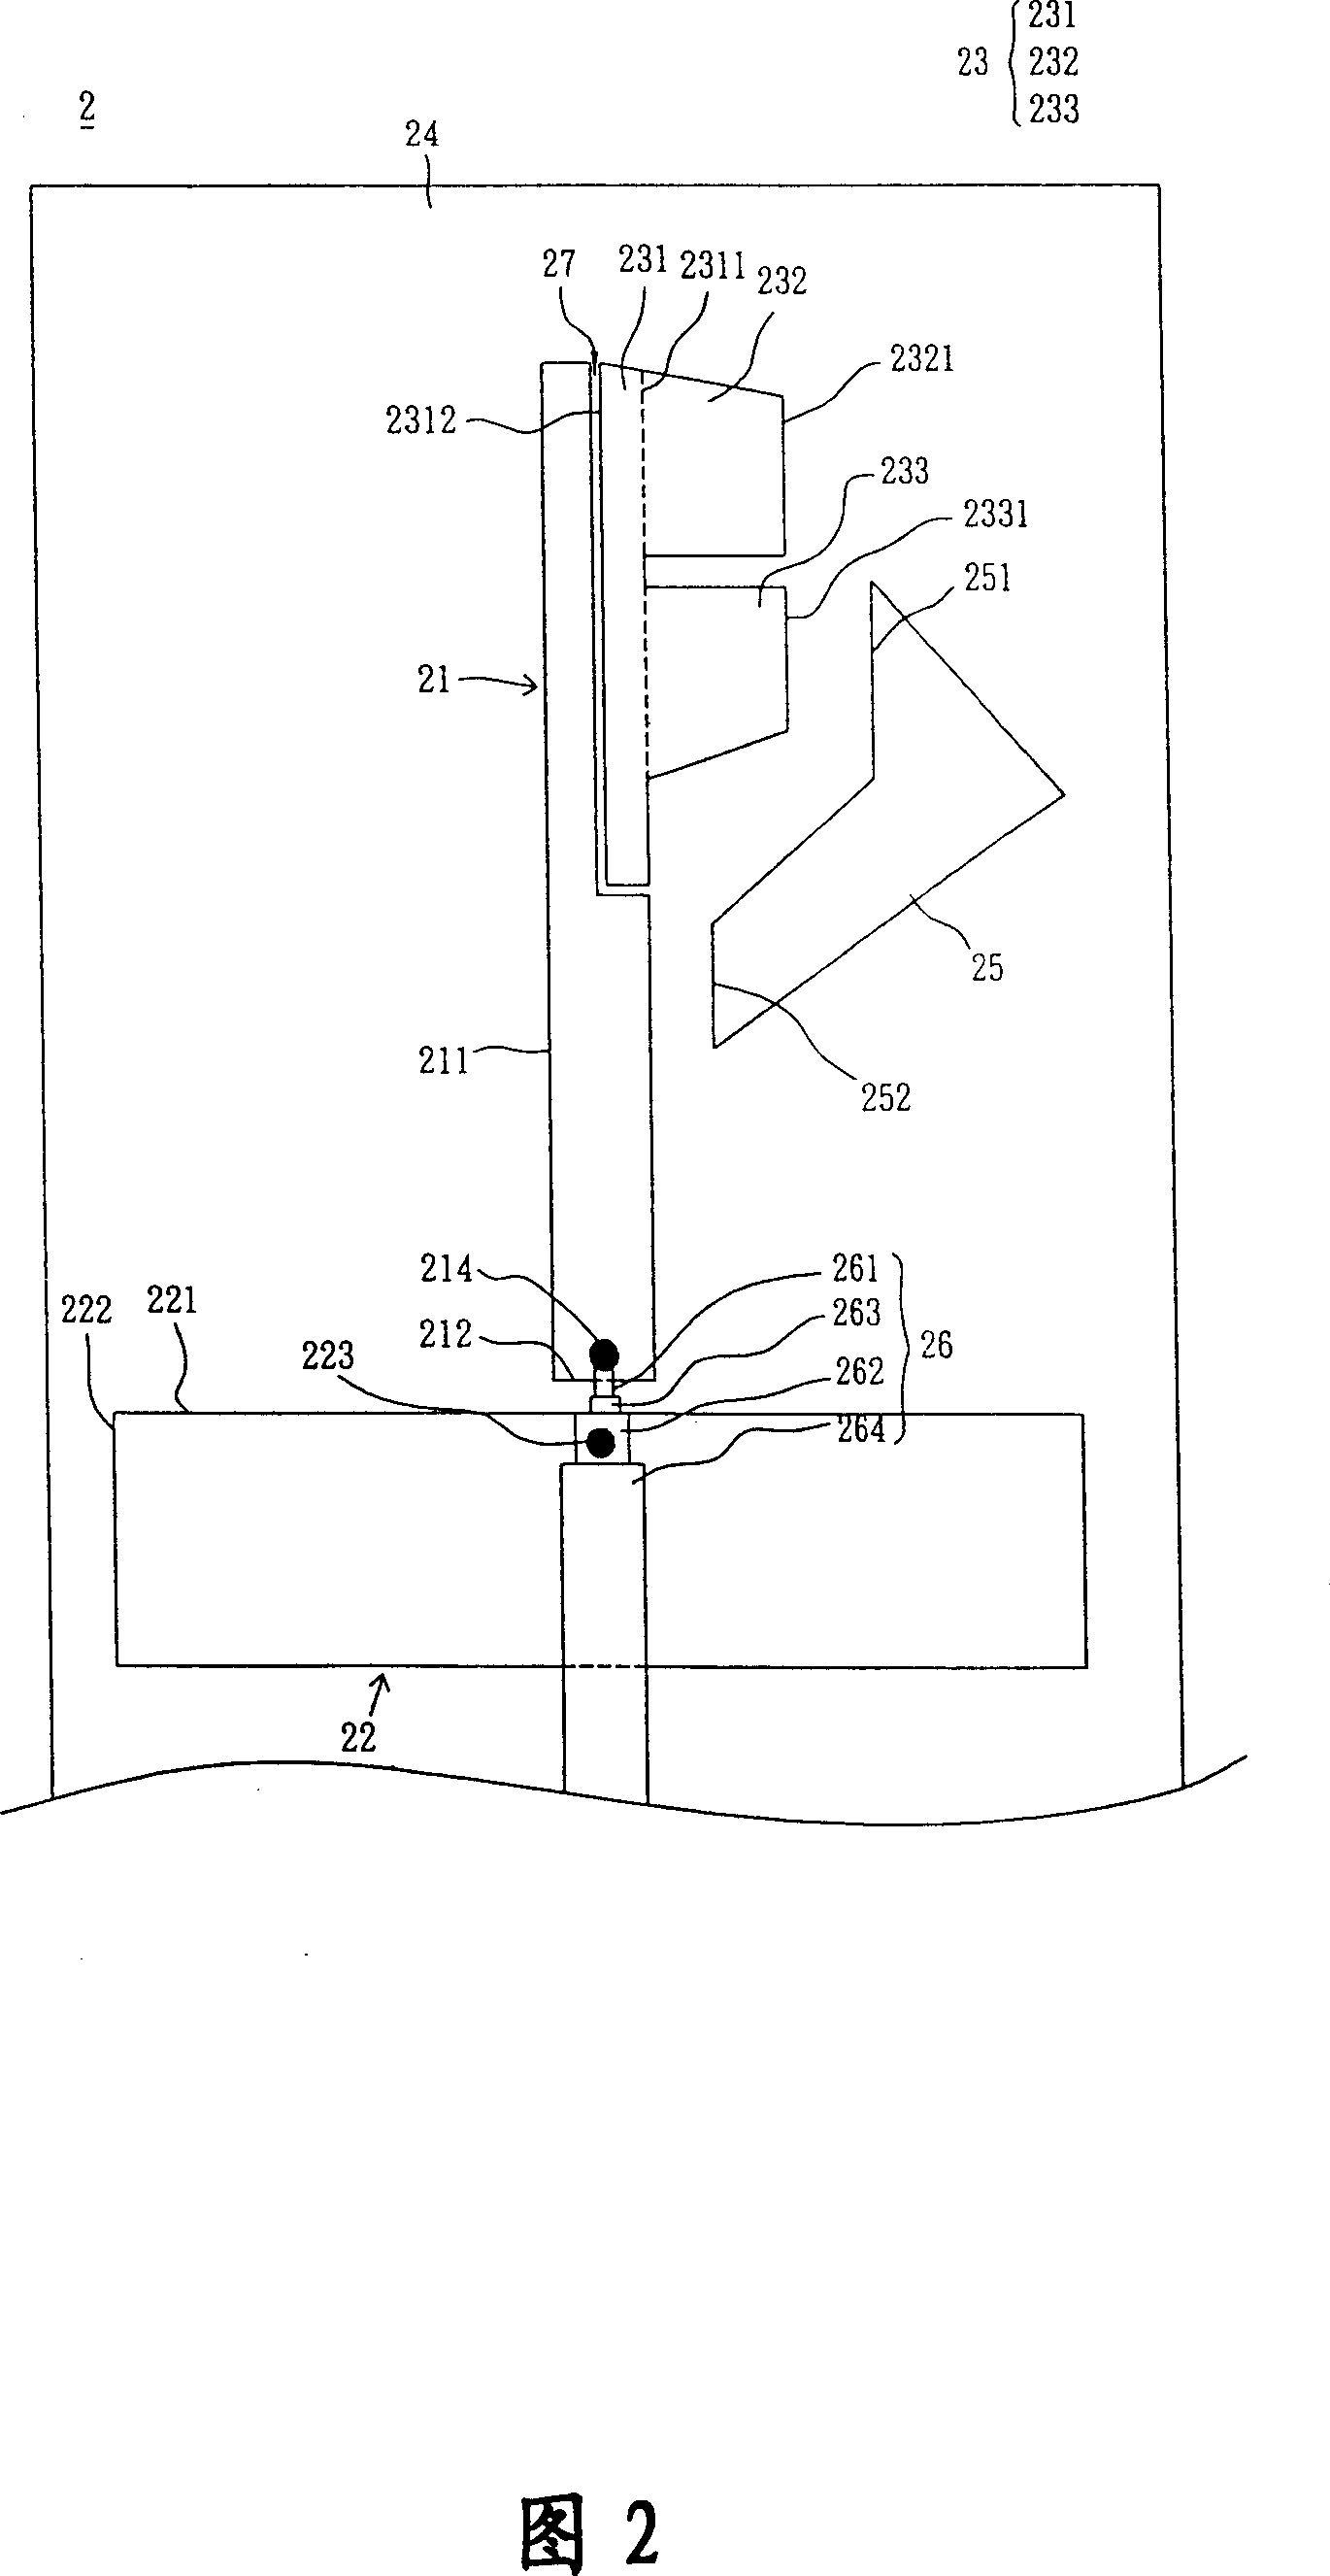 Double-frequency reversed F-typed antenna